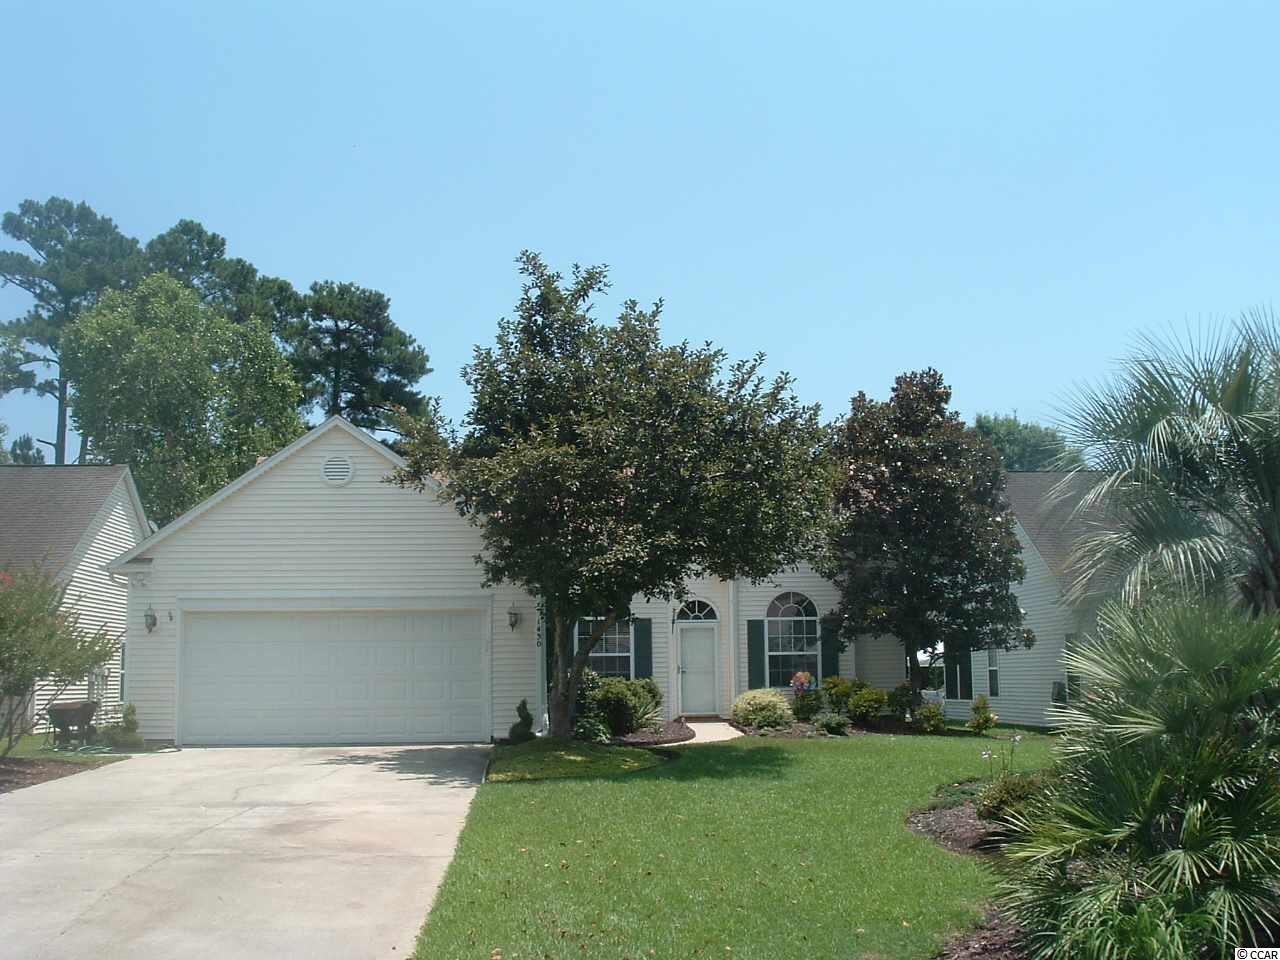 1430 Winged Foot Ct. Murrells Inlet, SC 29576